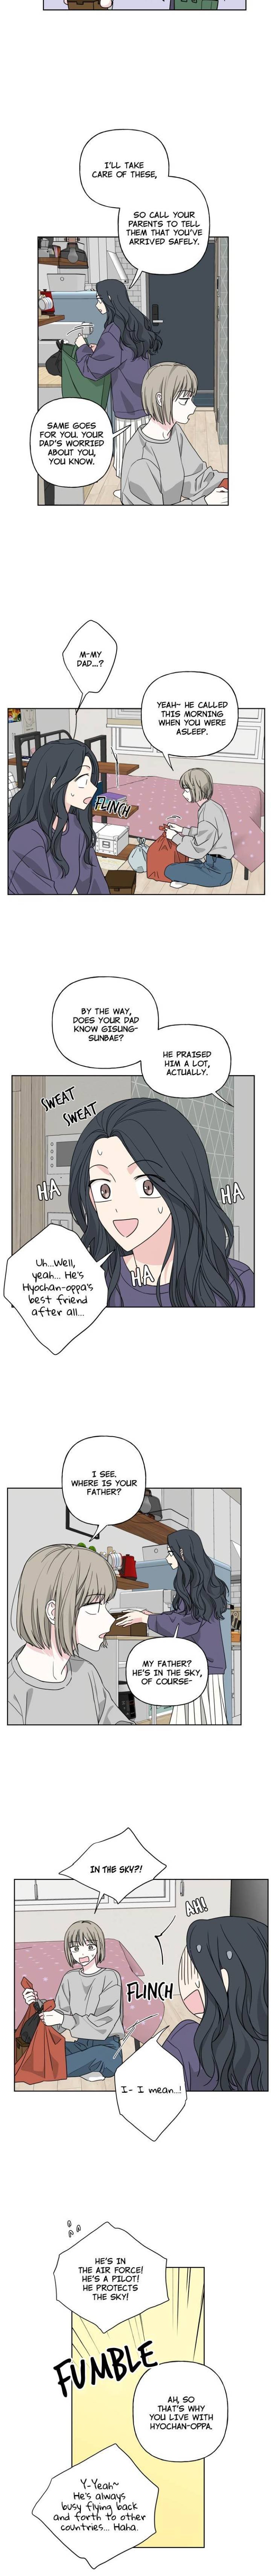 mother-im-sorry-chap-34-8